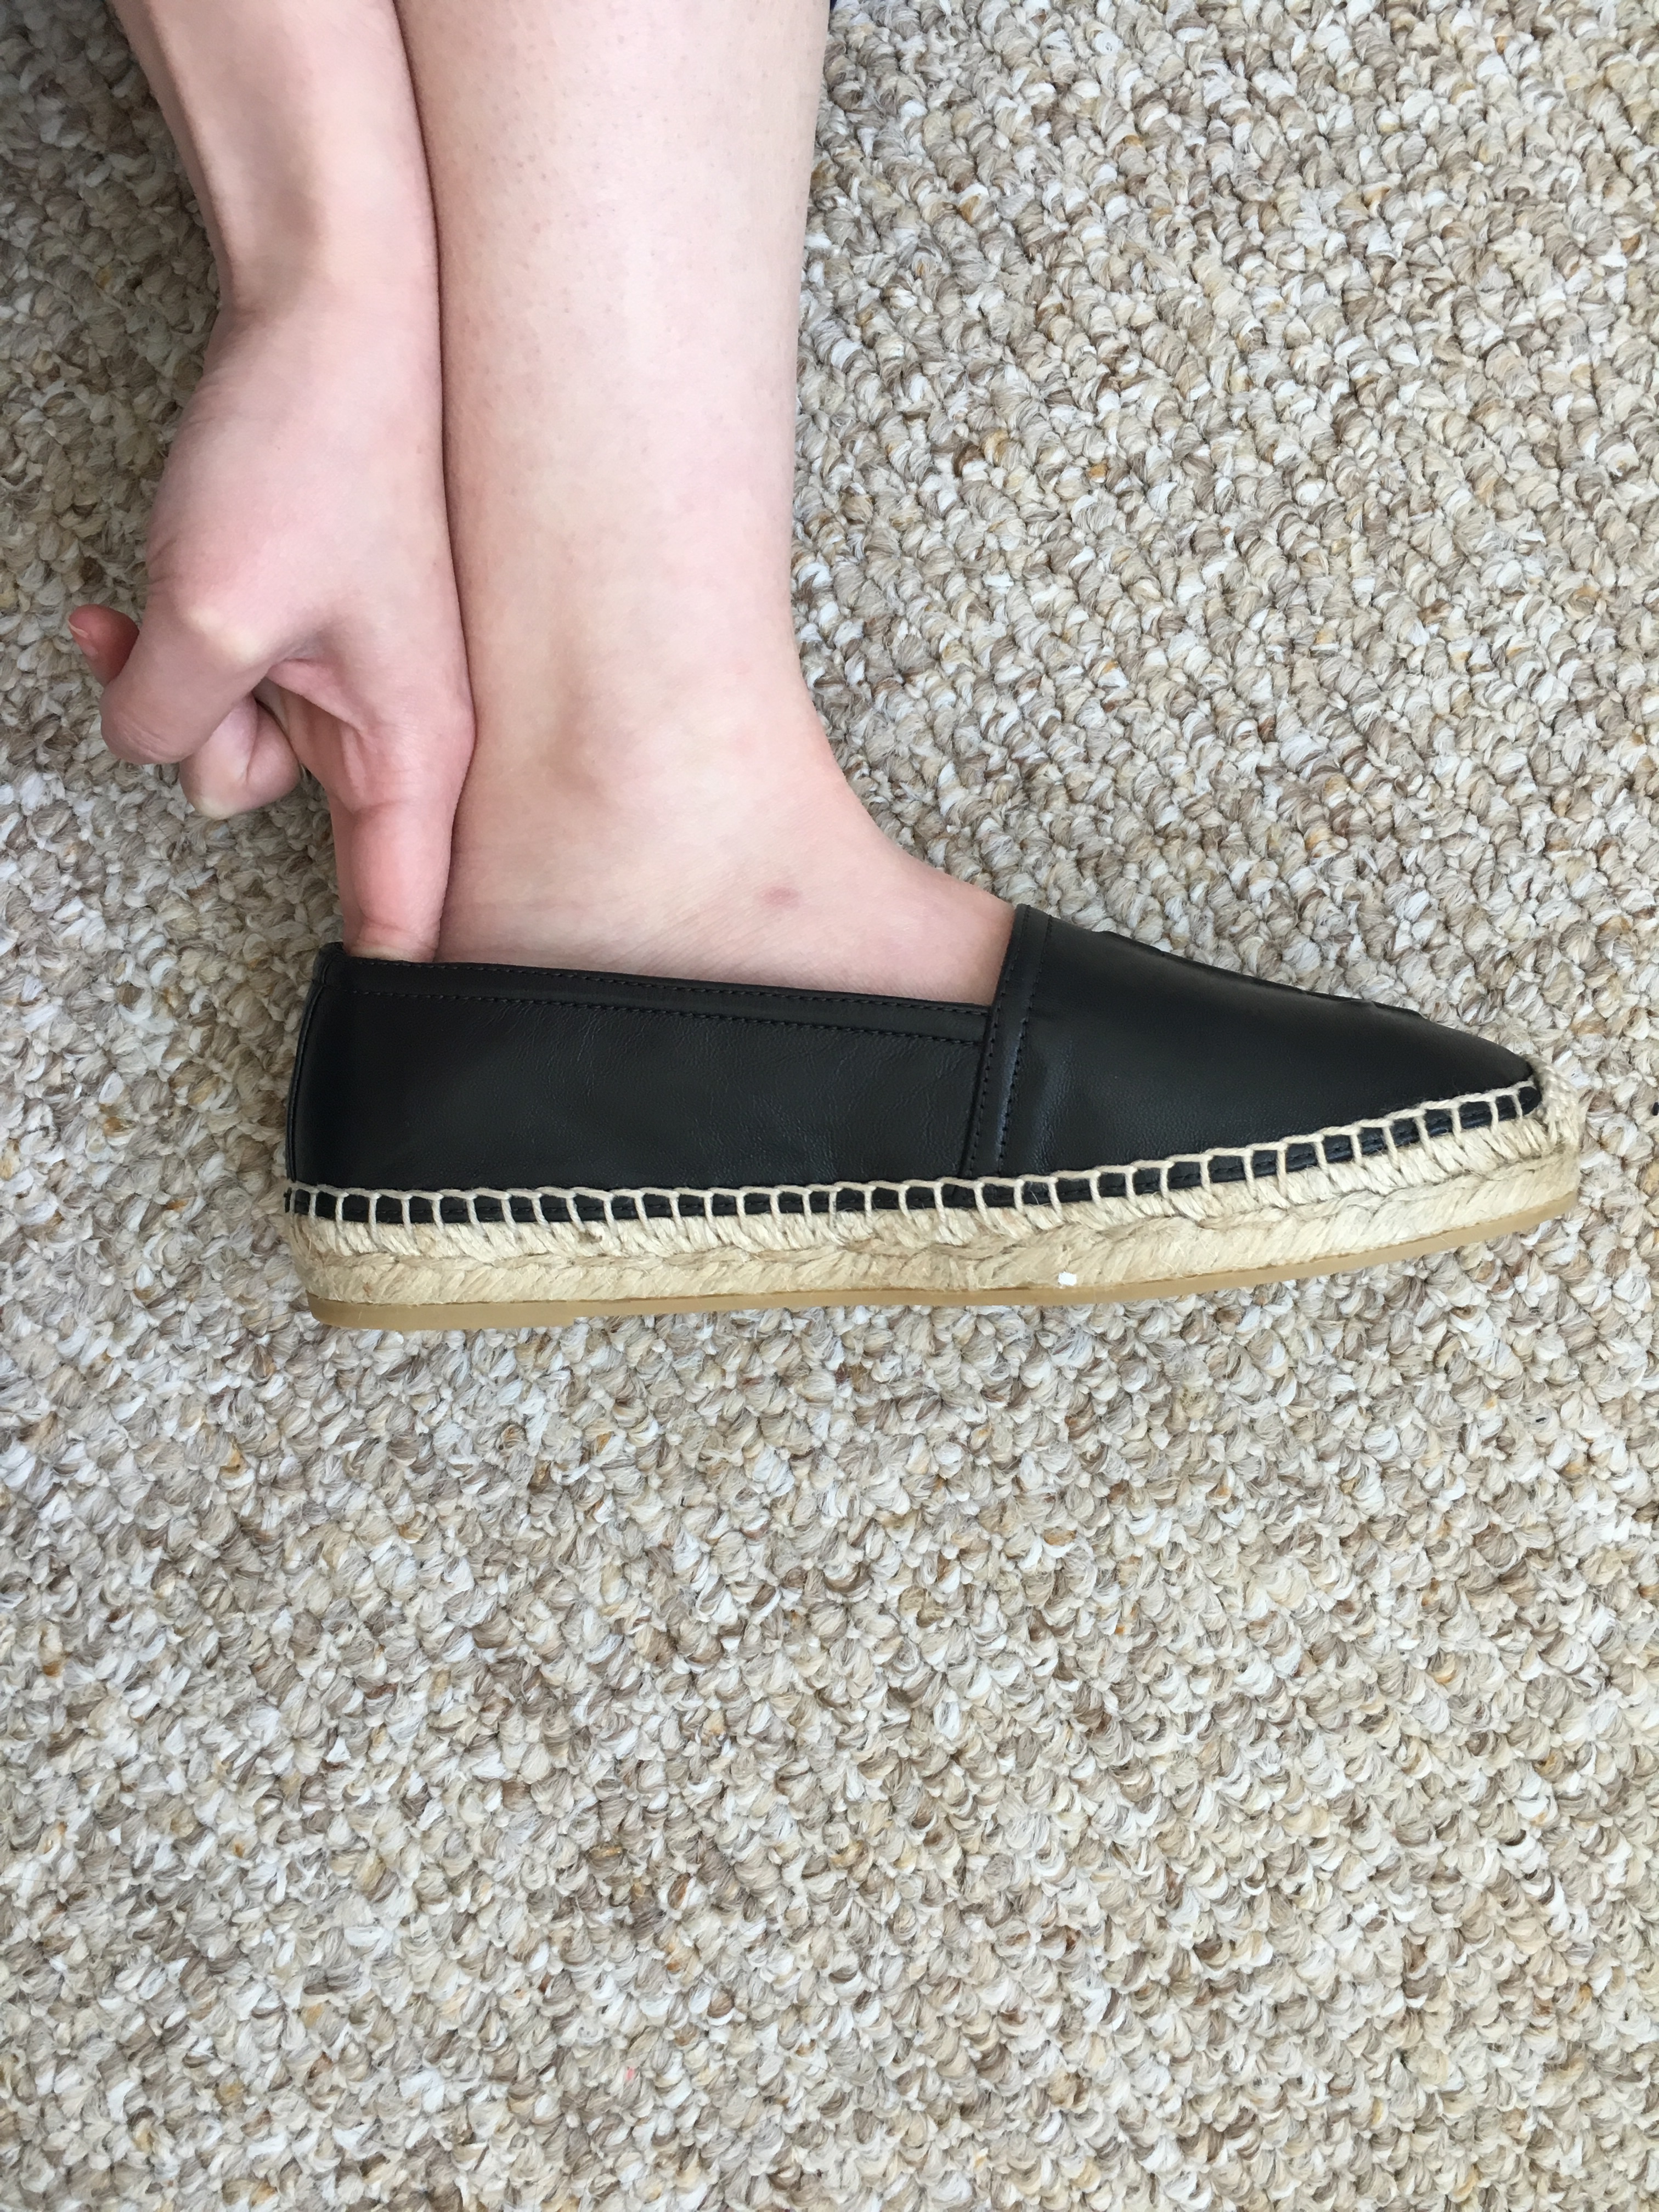 Saint Laurent Leather Espadrilles Reveal - Sizing, Fit, and